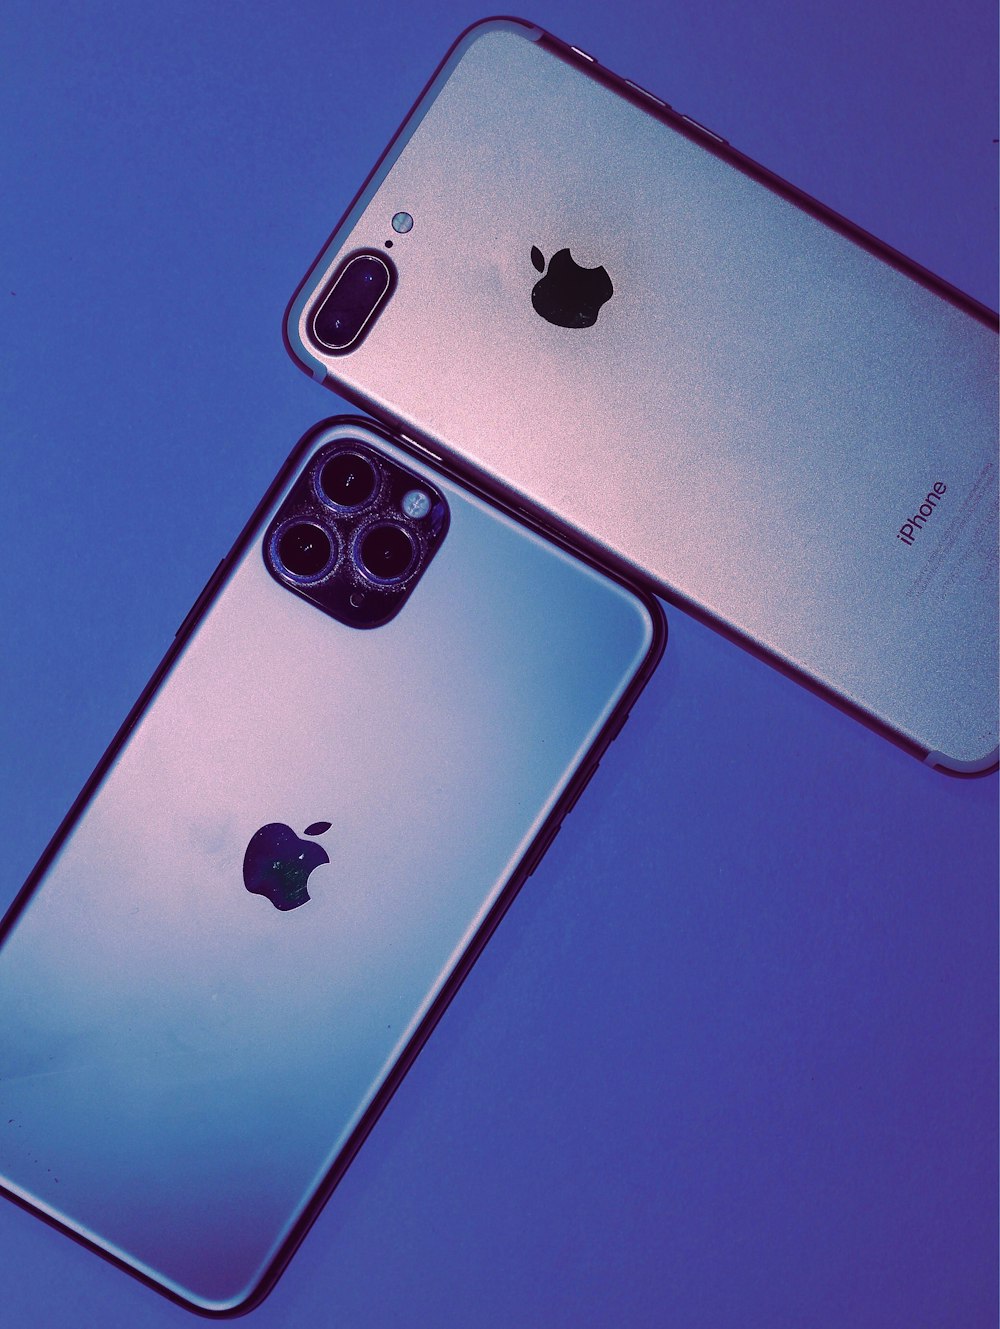 two iphones side by side on a blue background